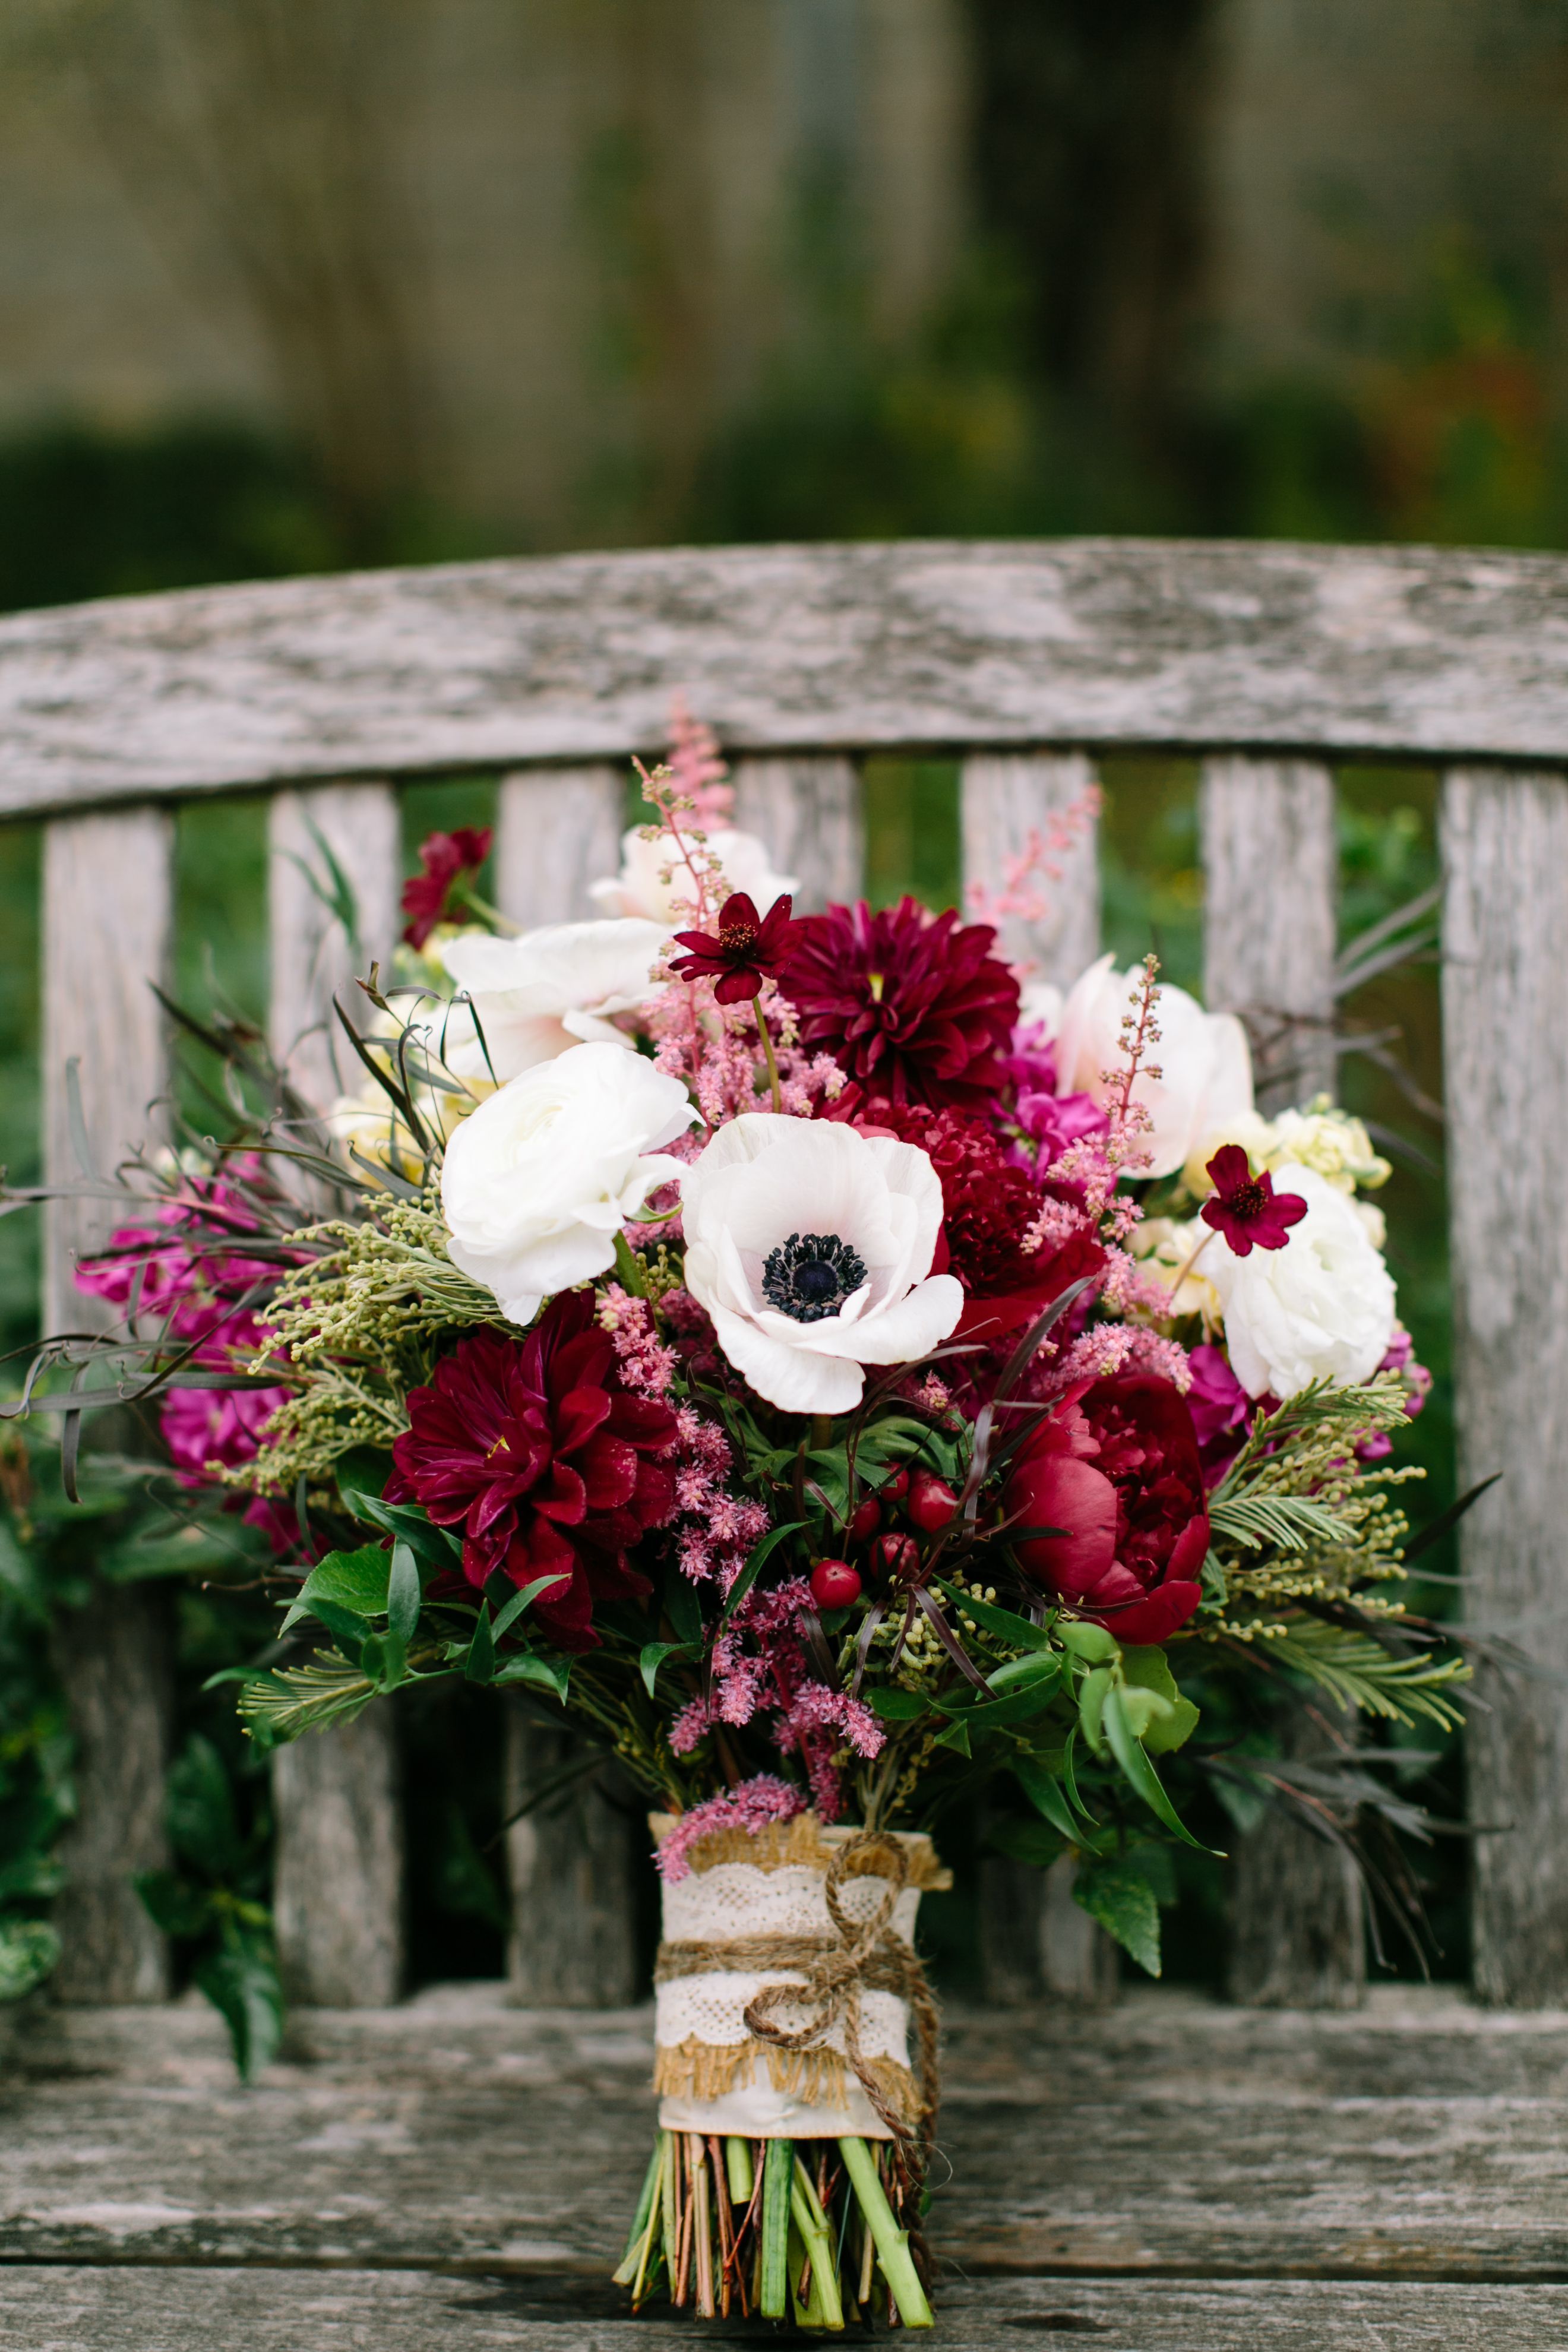 i loved my bouquet!! wine colored peonies, anemones for pops of white, and greenery. it was a wildflower textured bouquet for fall